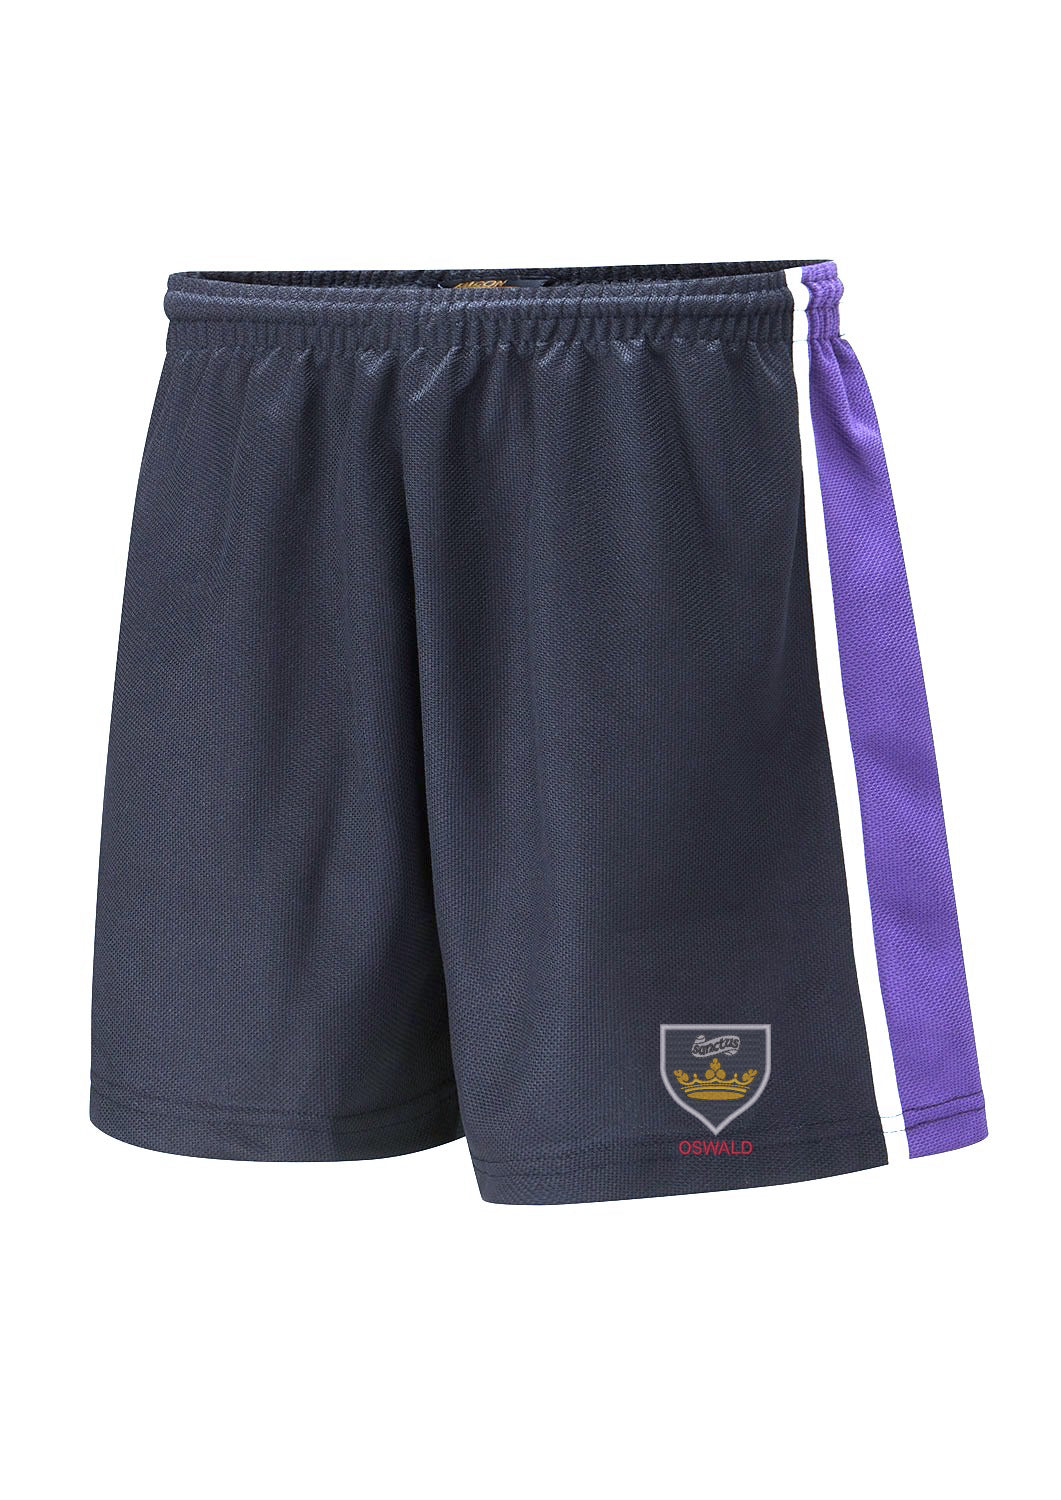 All Saints Navy, Purple And White Sport Shorts House Oswald